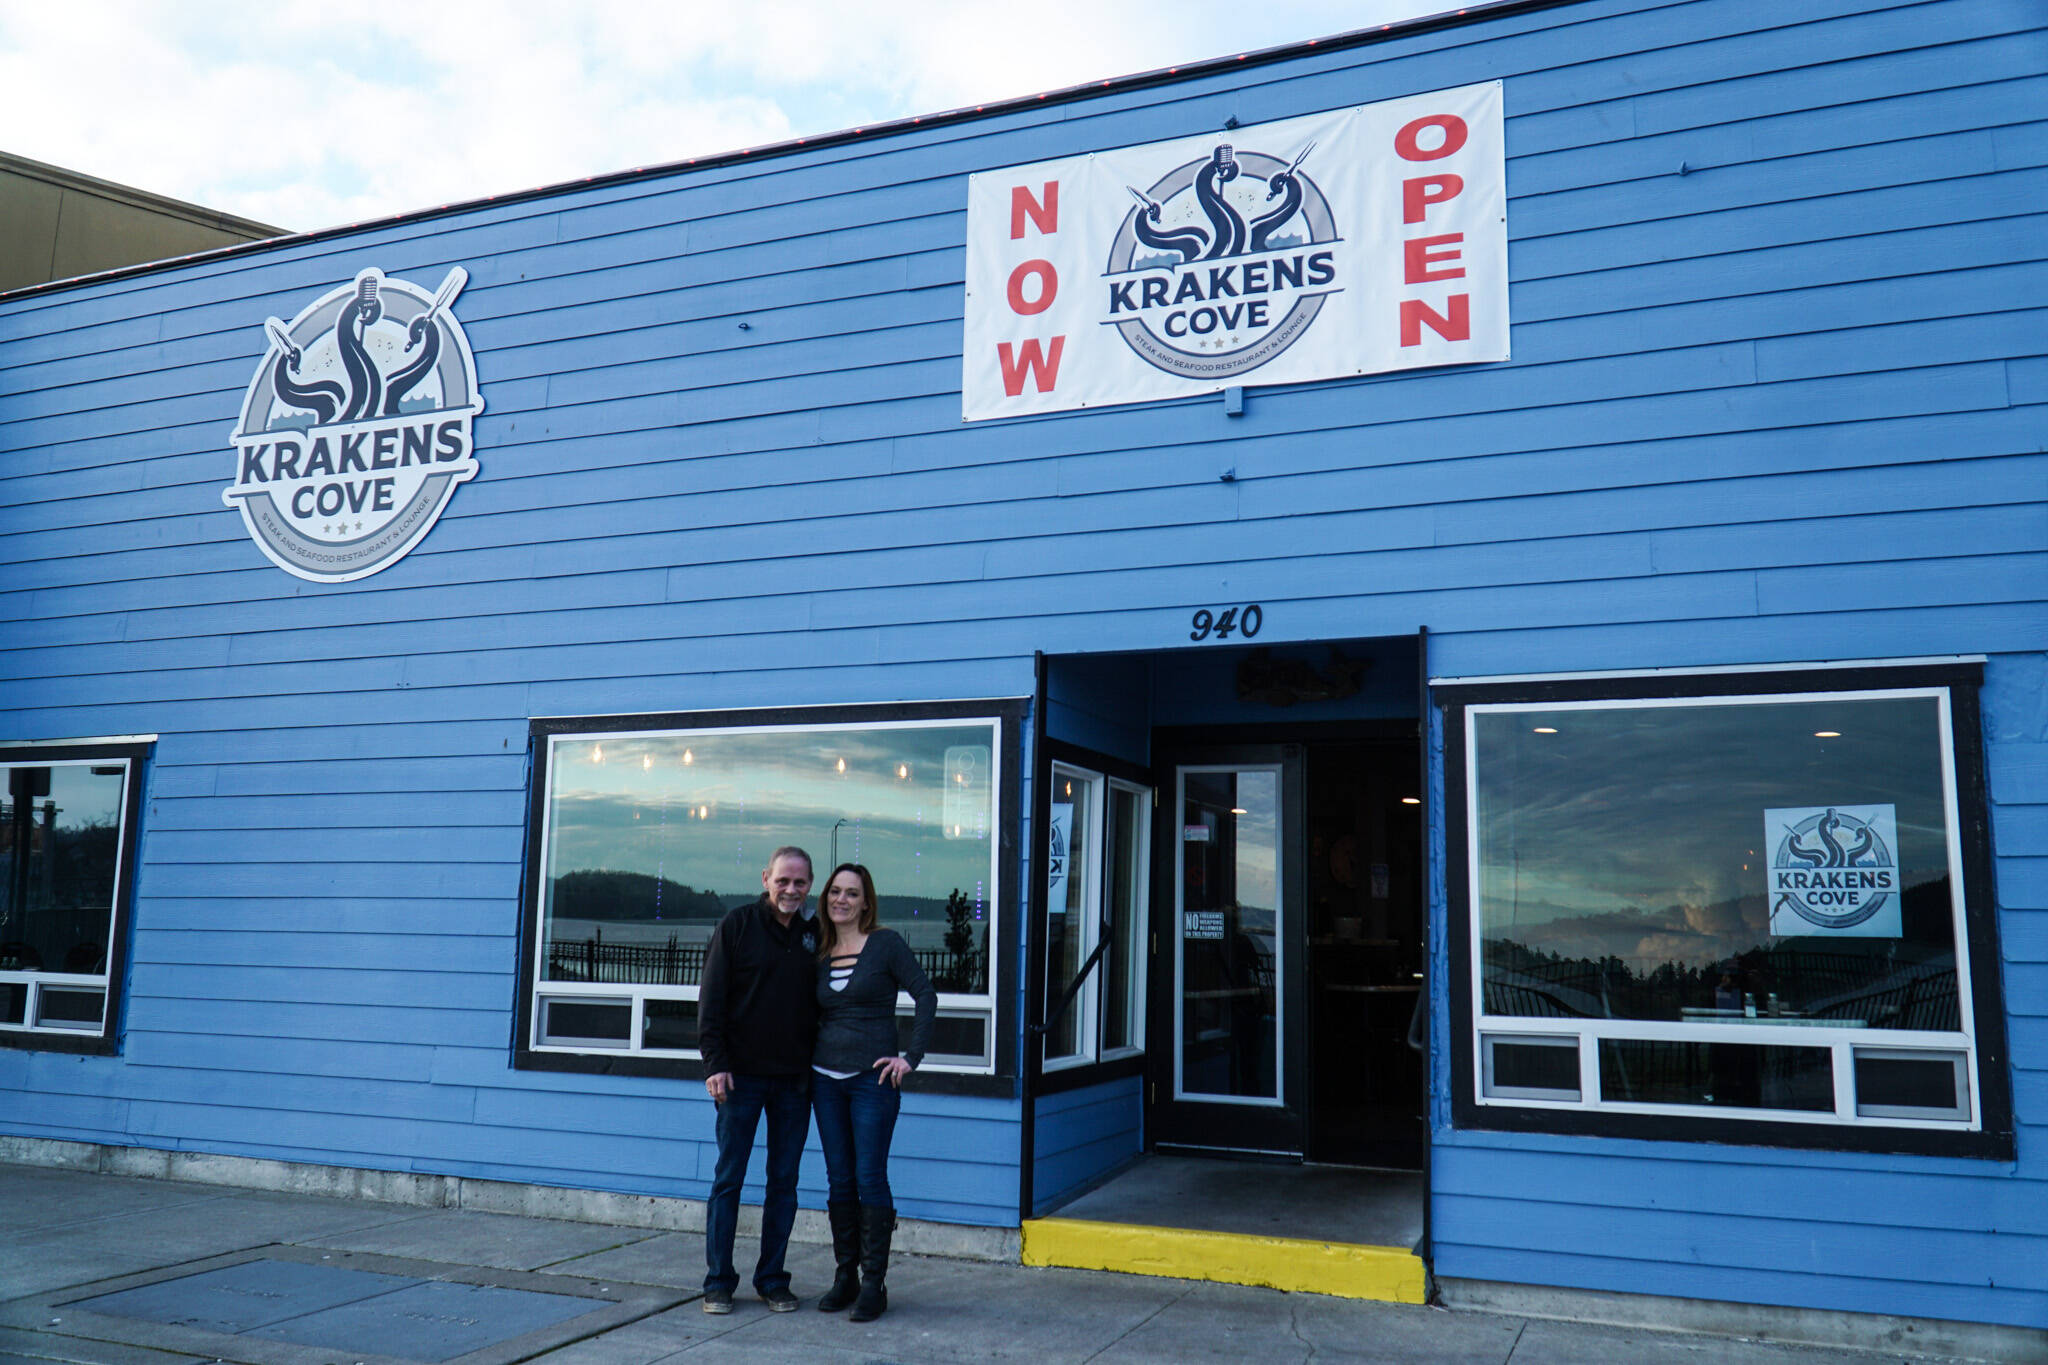 Co-owners Kevin (left) and Megan Collins (right) pose in front of Kraken's Cove in Oak Harbor. (Photo by Sam Fletcher)